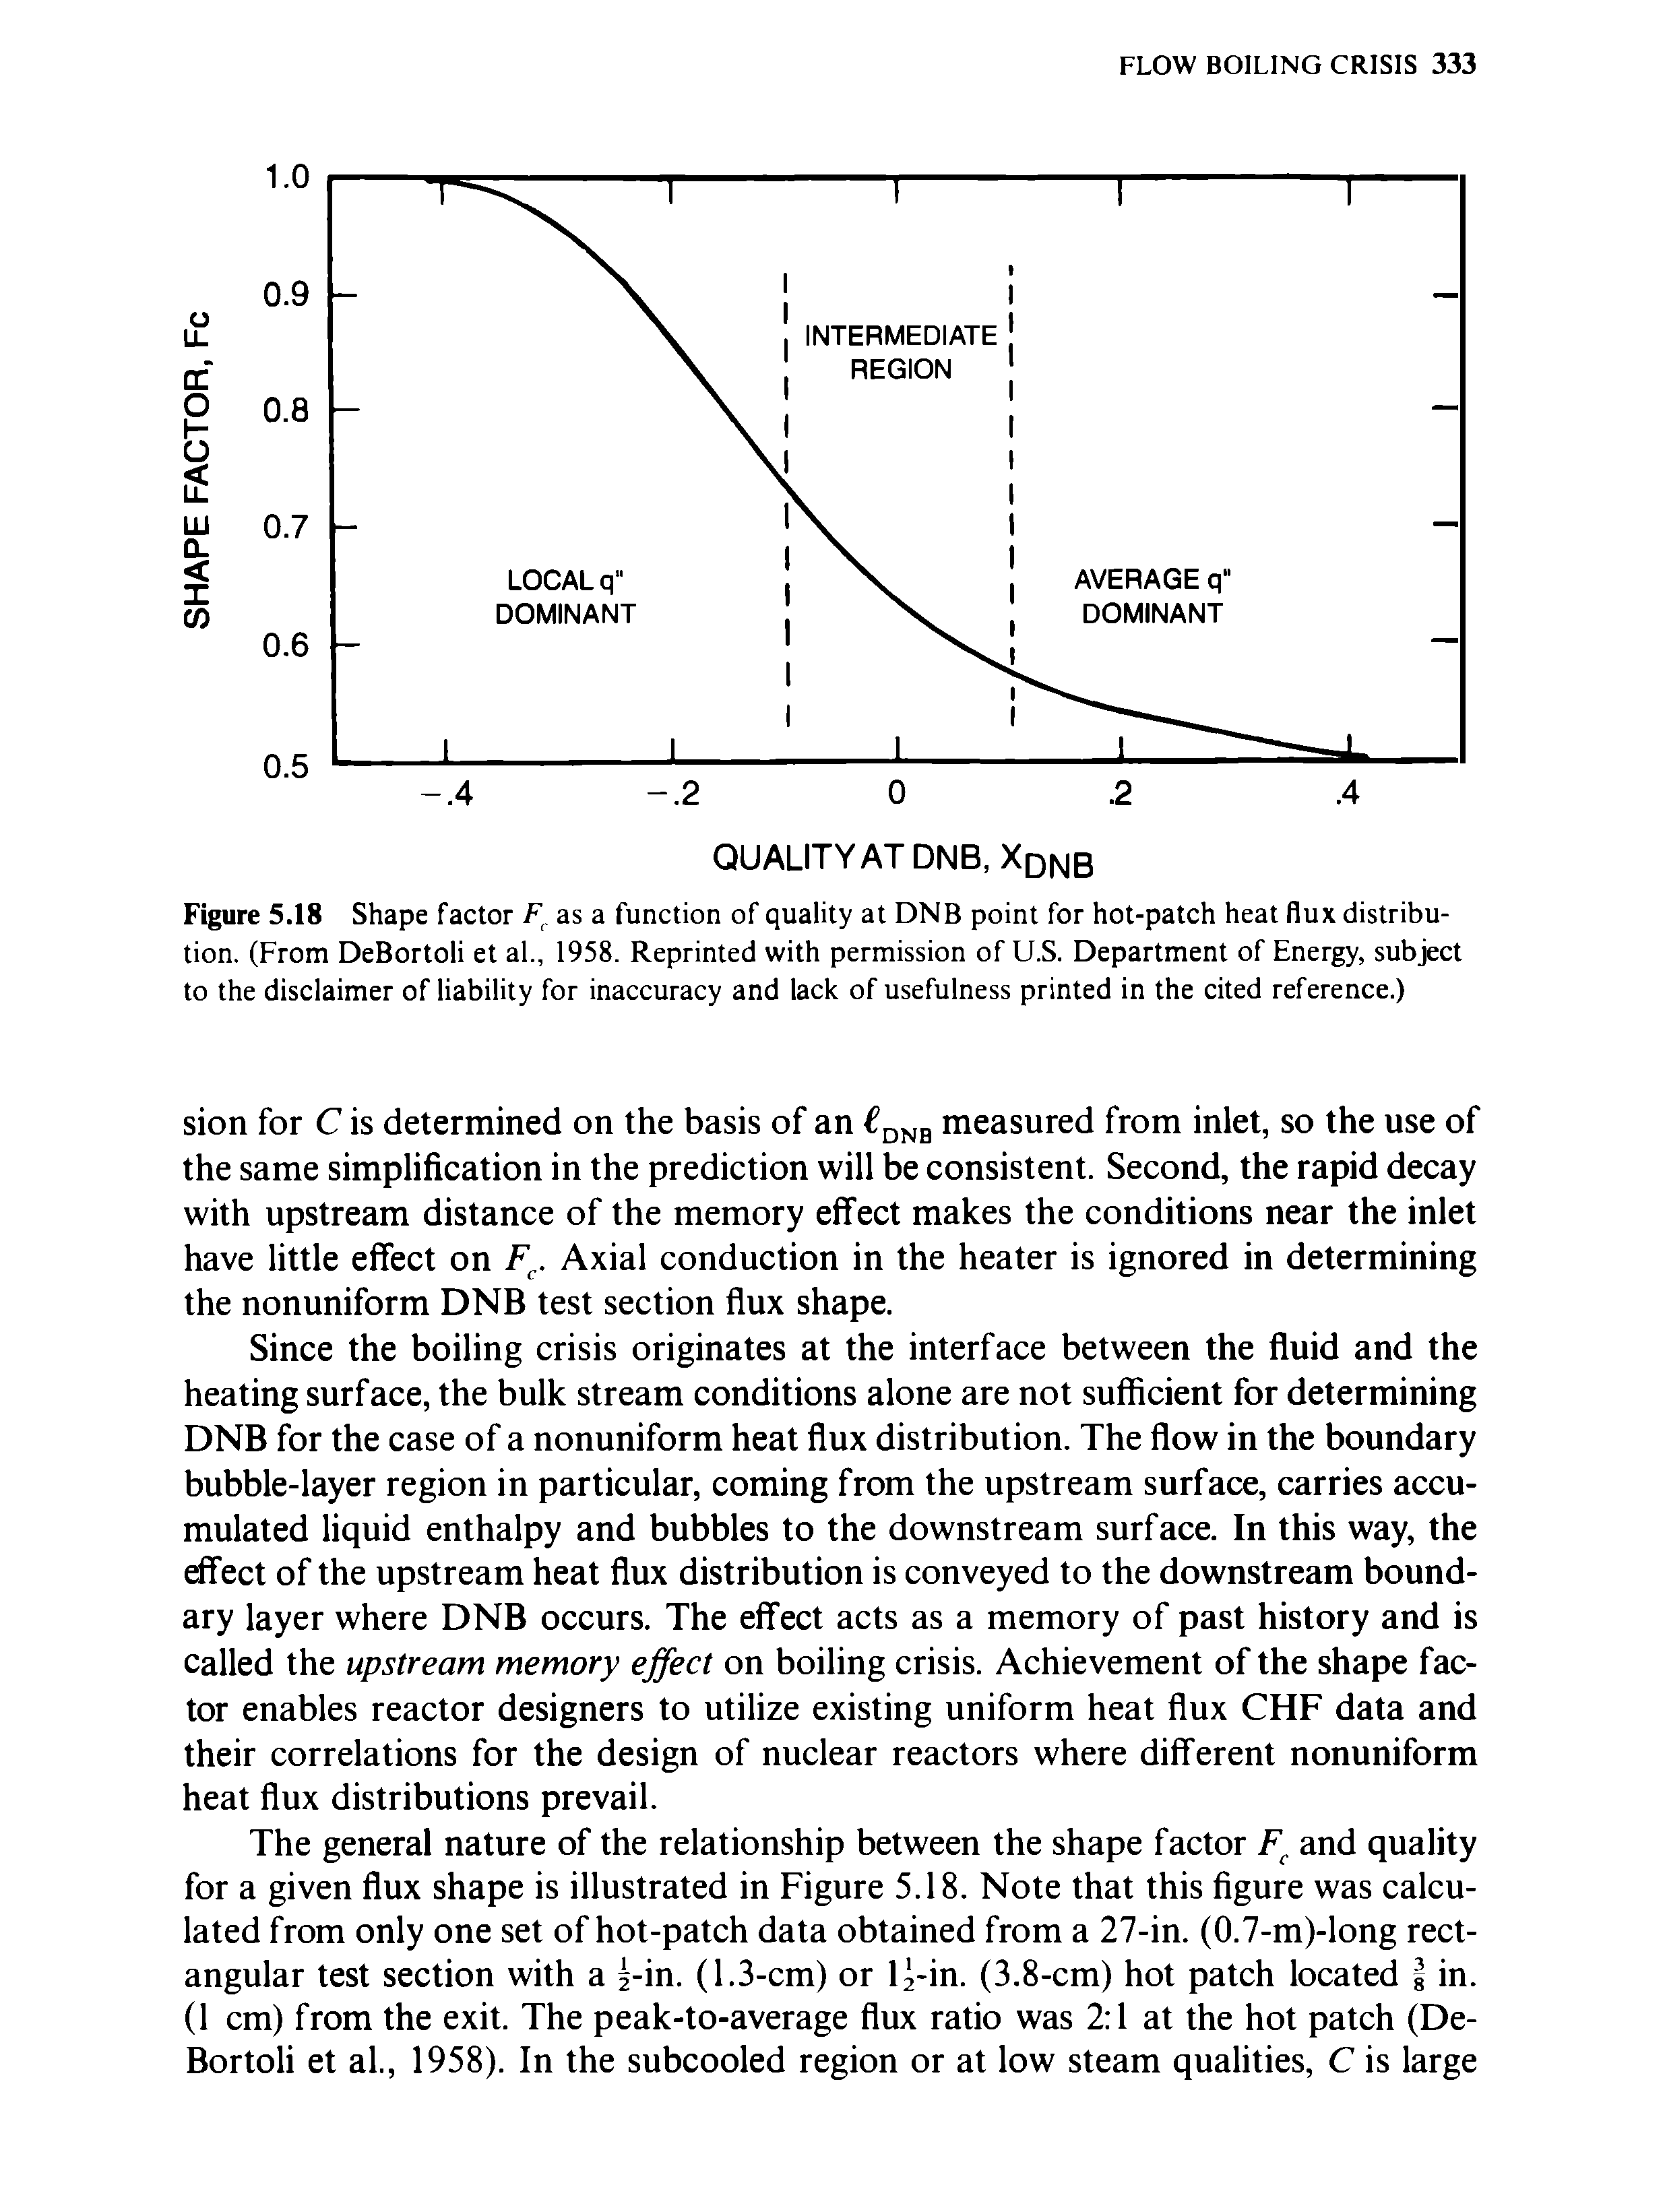 Figure 5.18 Shape factor Ft as a function of quality at DNB point for hot-patch heat flux distribution. (From DeBortoli et al., 1958. Reprinted with permission of U.S. Department of Energy, subject to the disclaimer of liability for inaccuracy and lack of usefulness printed in the cited reference.)...